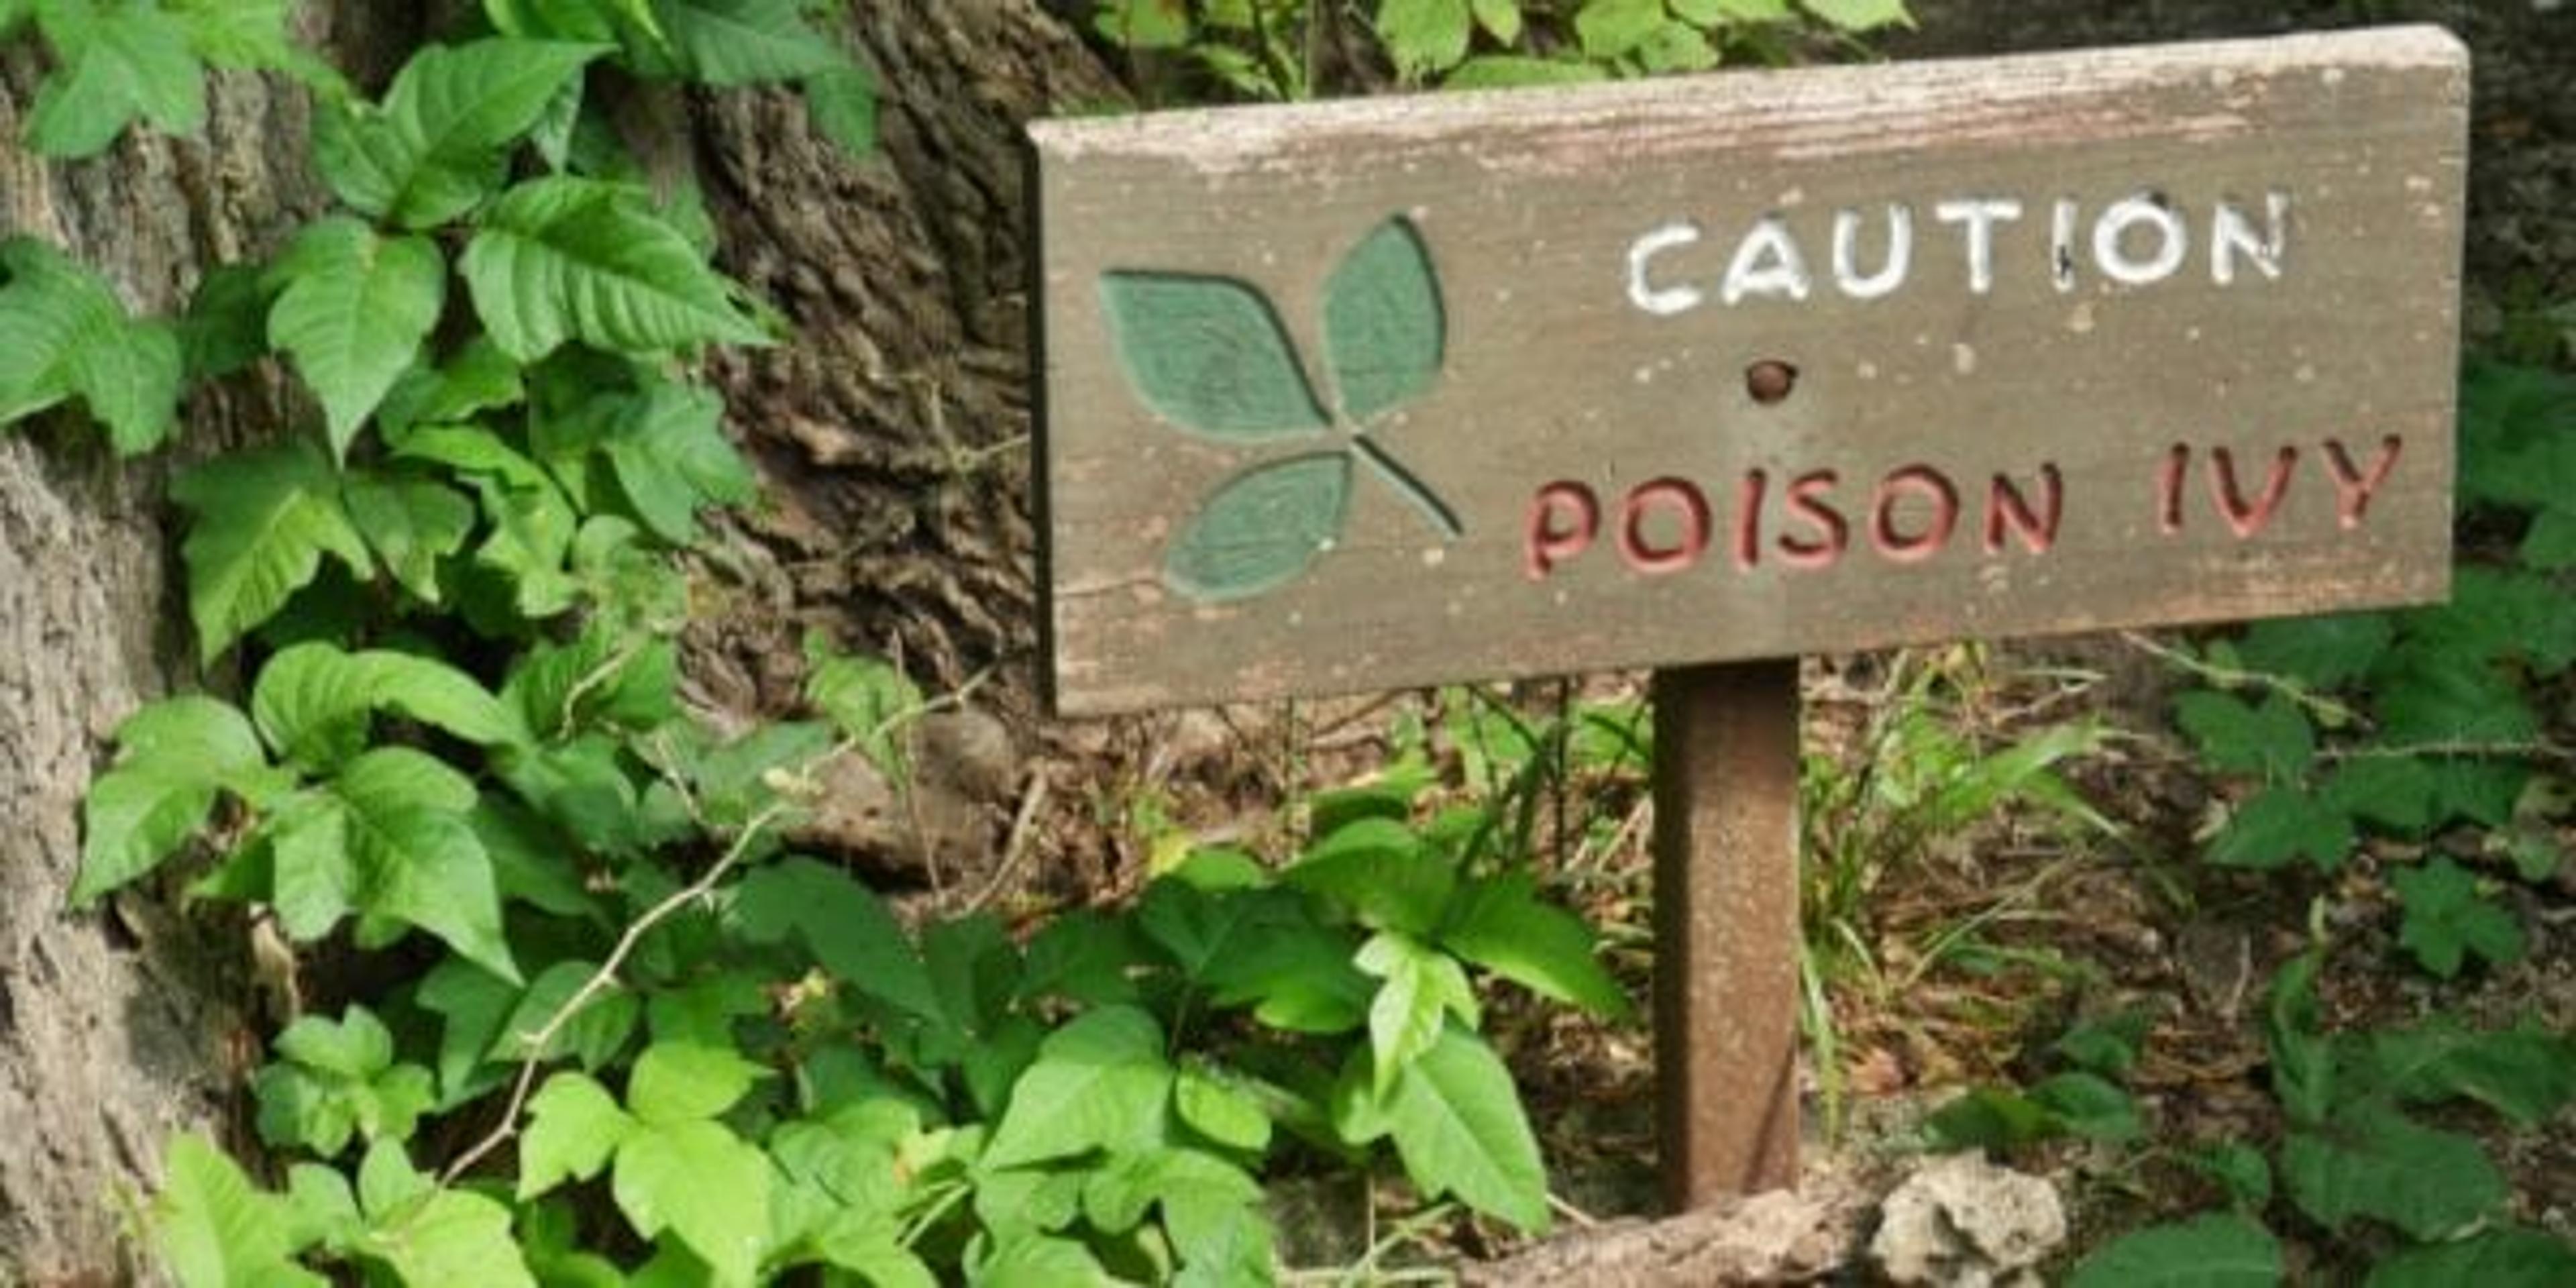 Sign with poison ivy plants around